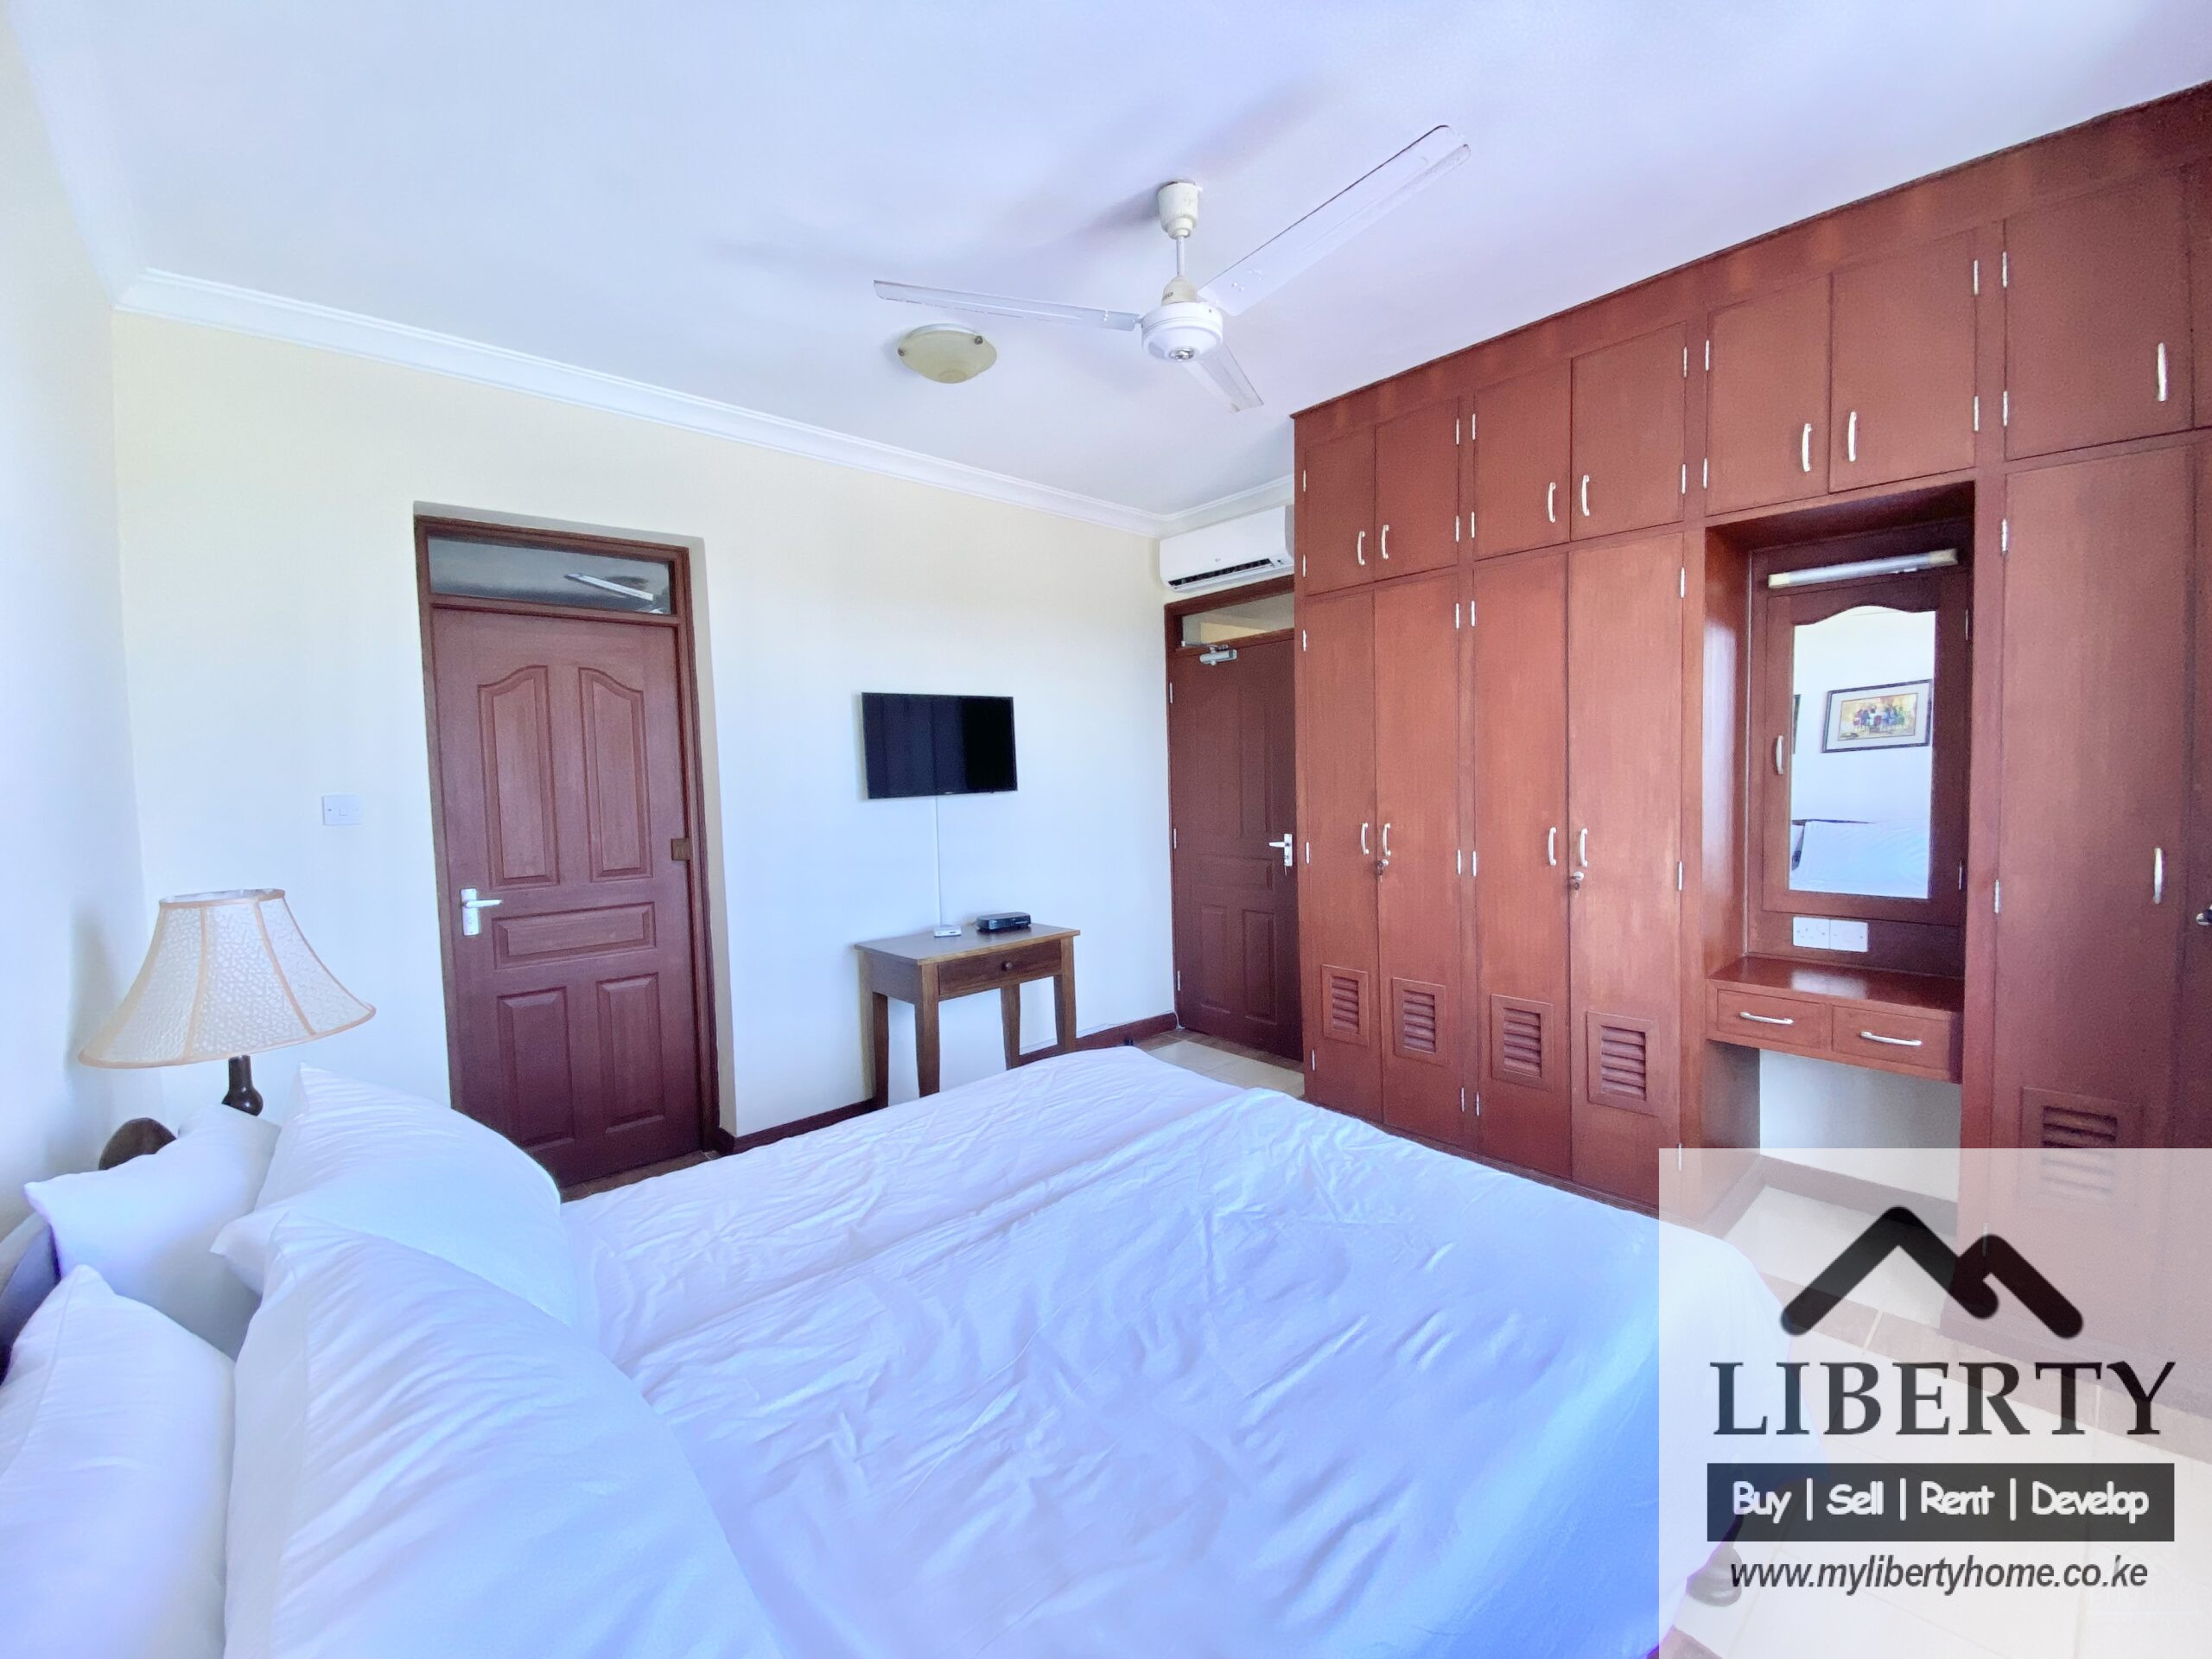 Ocean View 2 Bedroom Furnished Apartment In Mombasa-Nyali For Rent-120K- Ref-773